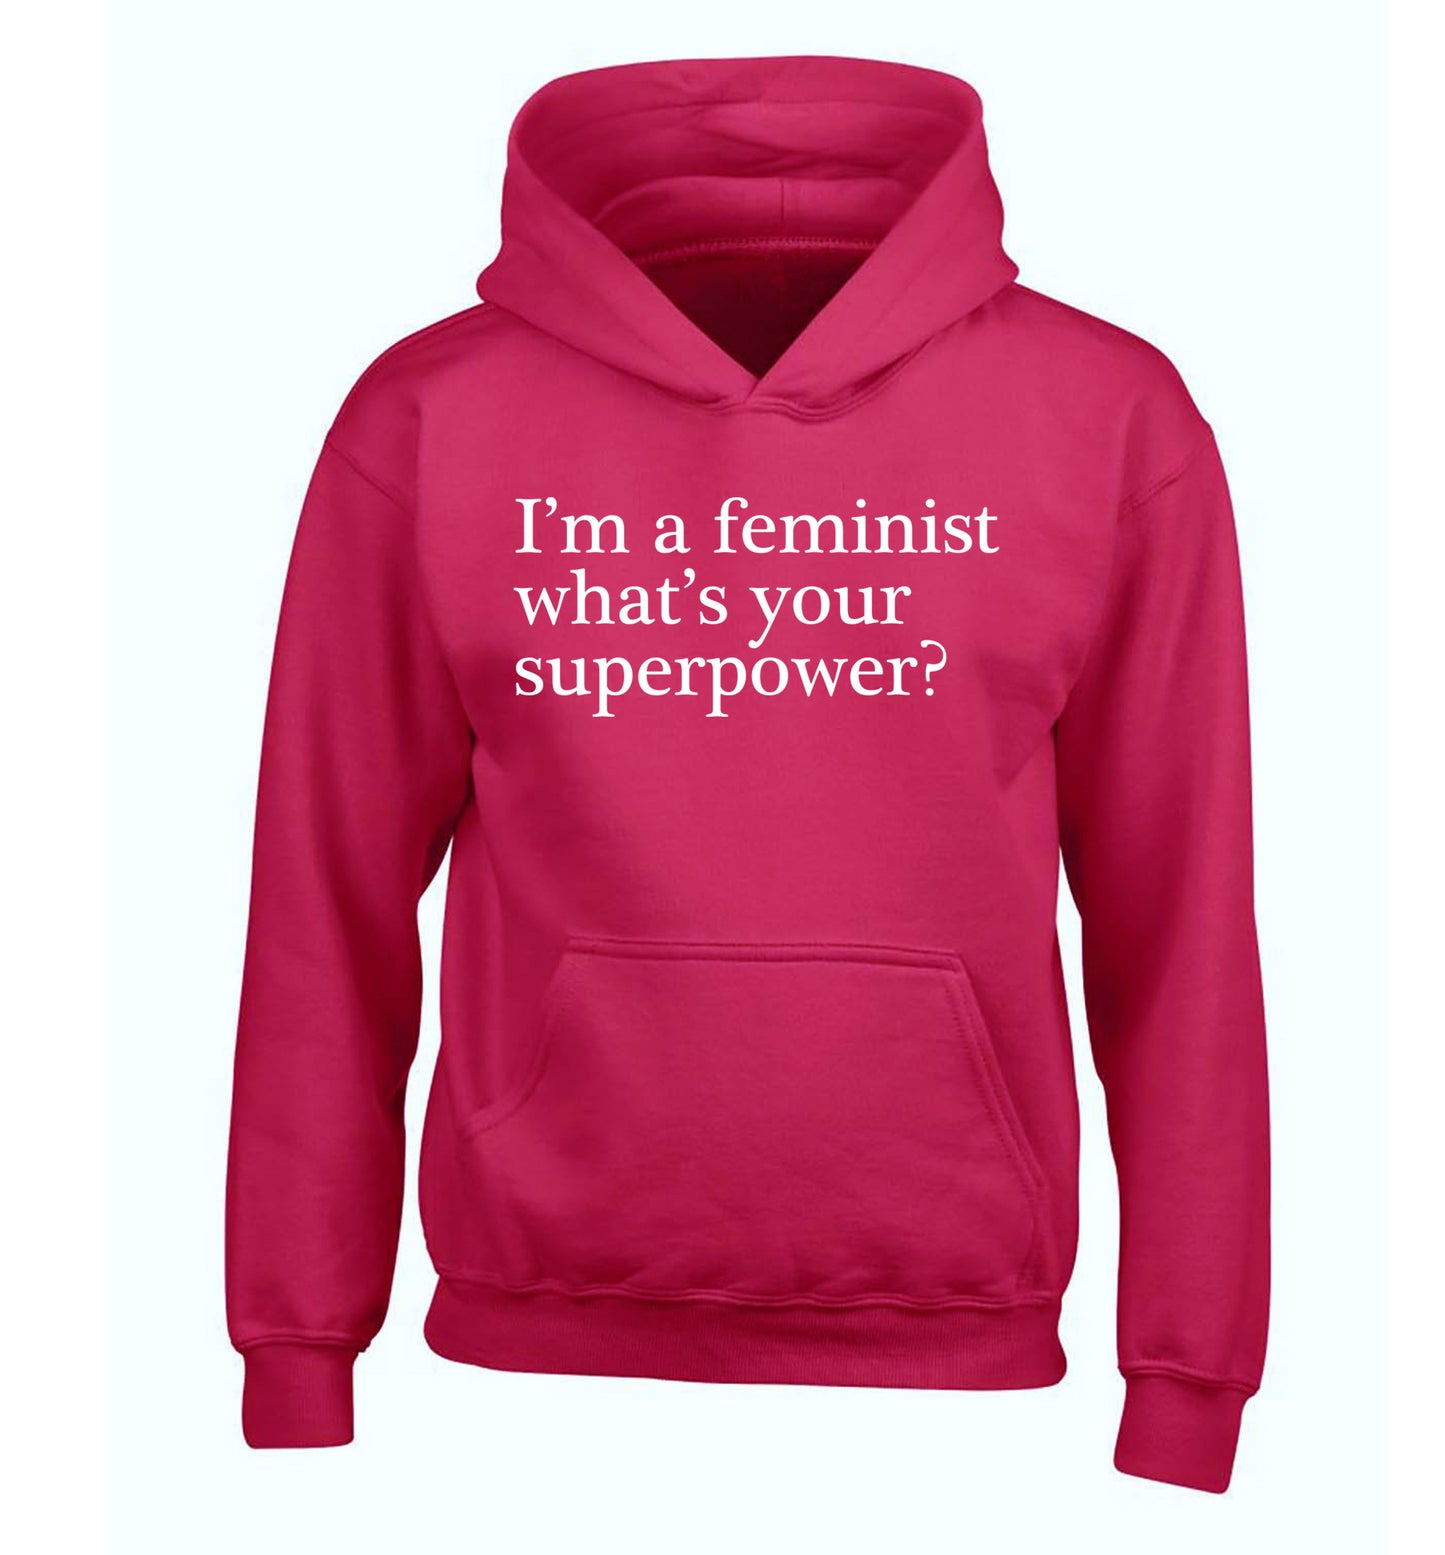 I'm a feminist what's your superpower? children's pink hoodie 12-14 Years